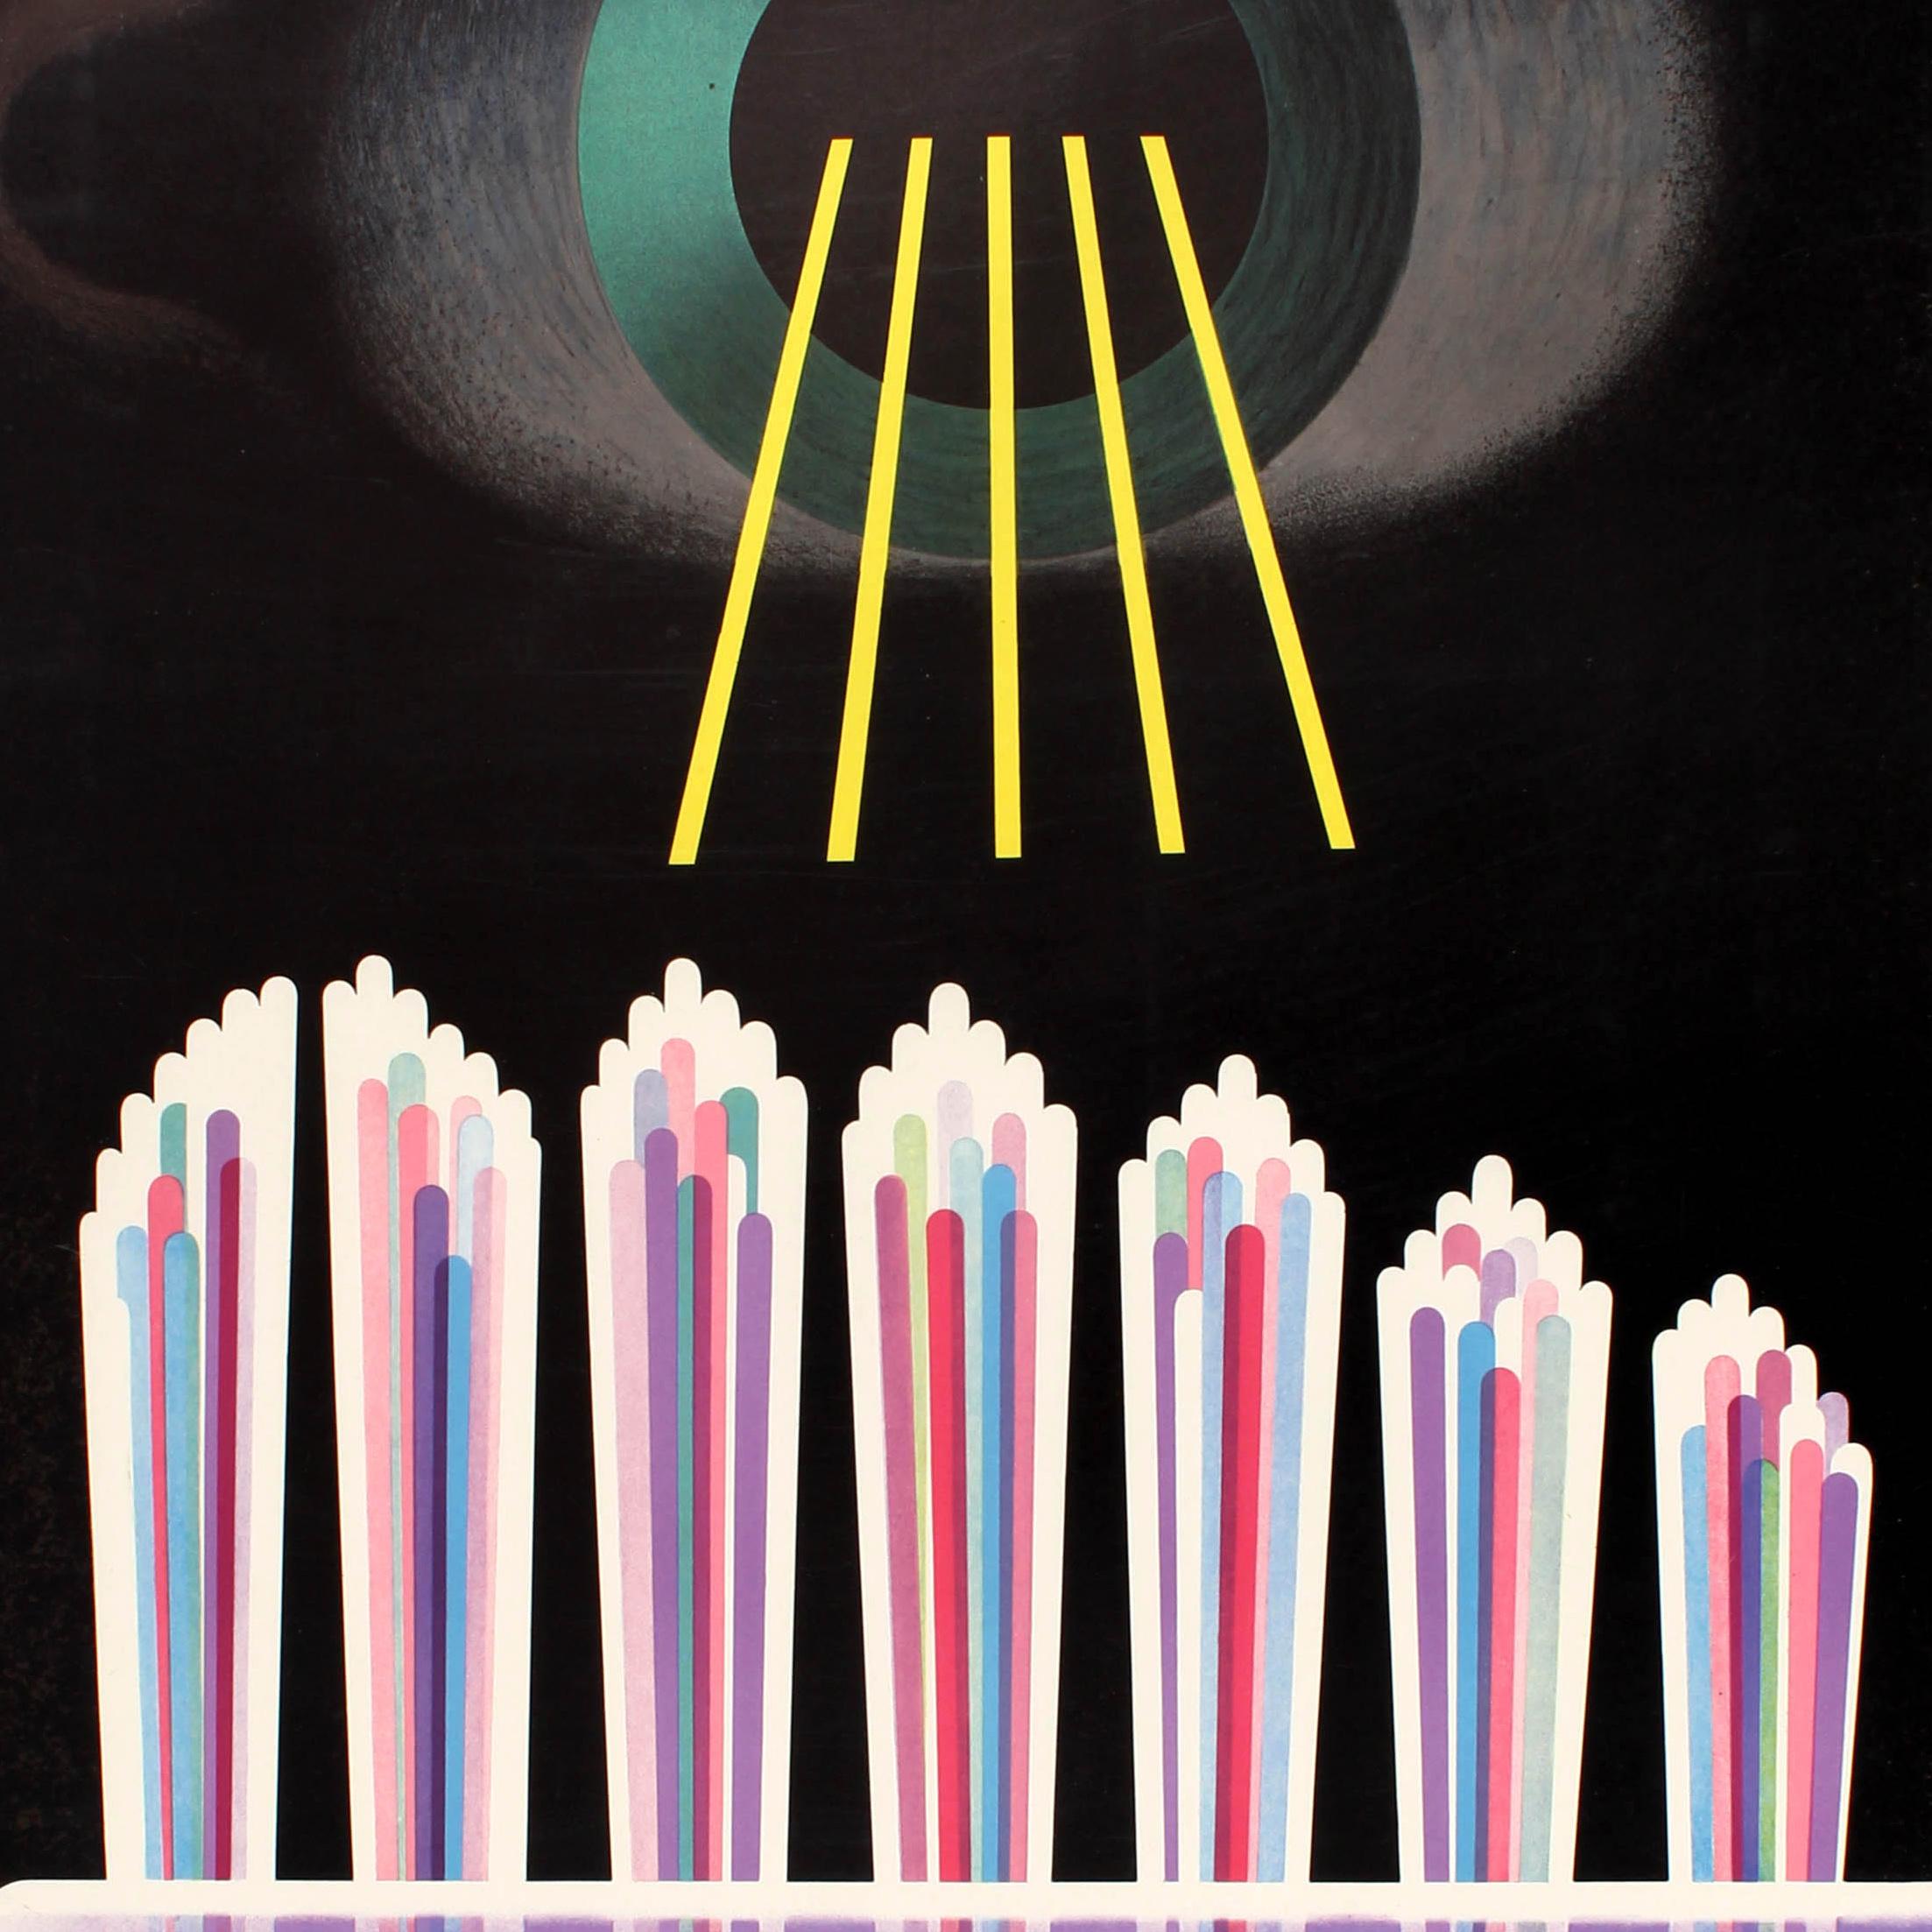 Original vintage advertising poster in French promoting the Tek brand of toothbrush - Demand the small round Tek / Exigez bien la petite Tek ronde. Great mid-century design by the graphic artist Fritz Buhler (1909-1963) featuring yellow lines to